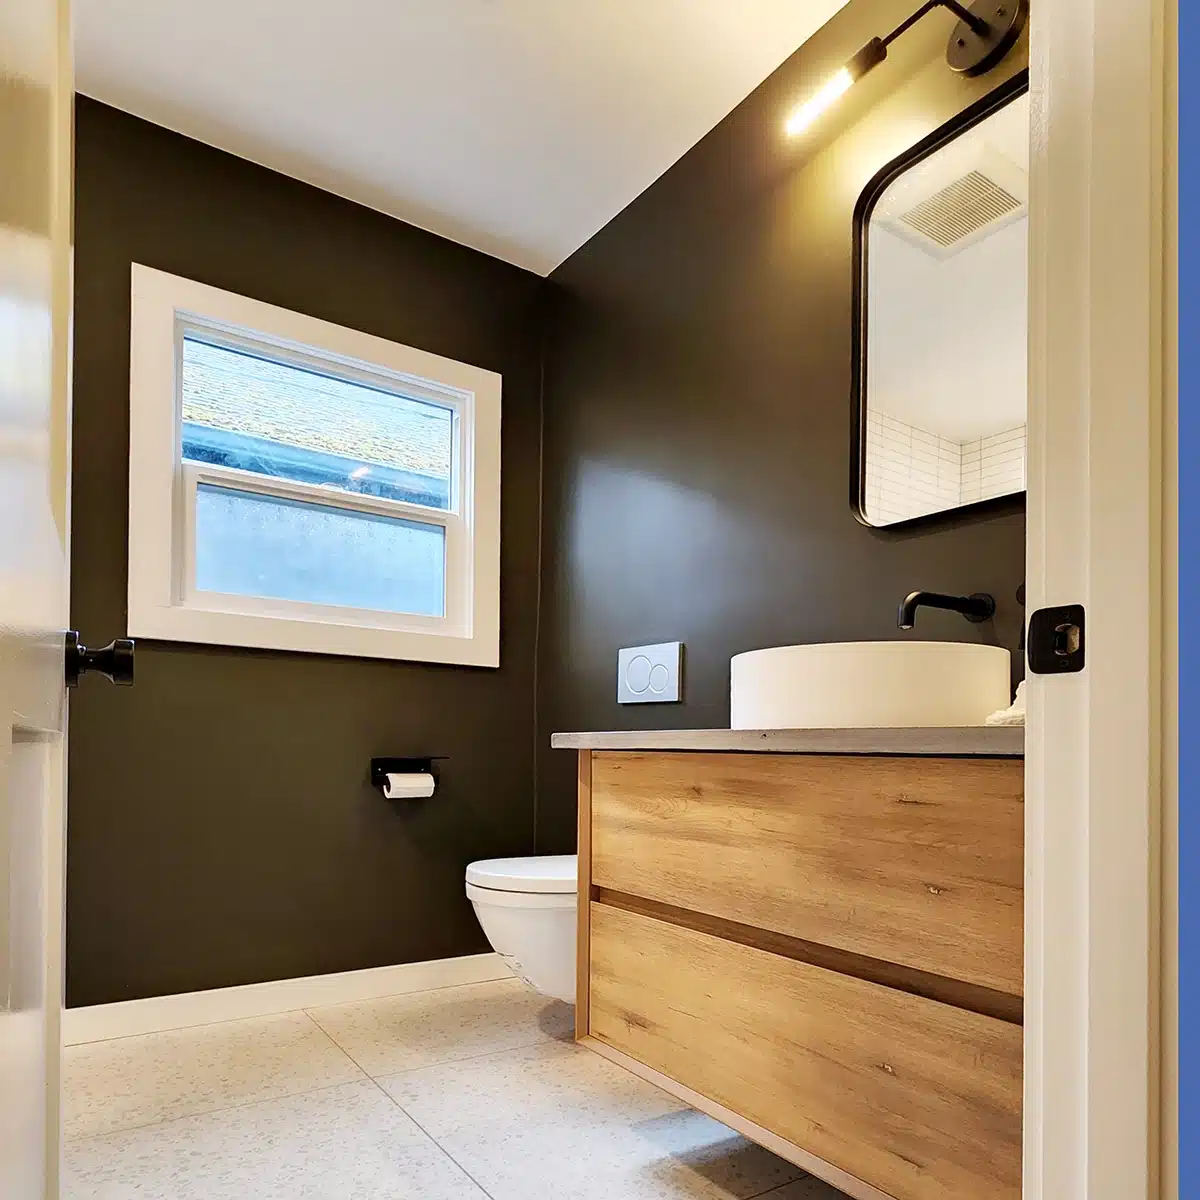 Compact and stylish bathroom design featuring a dark wall, wooden vanity, and wall-mounted toilet.